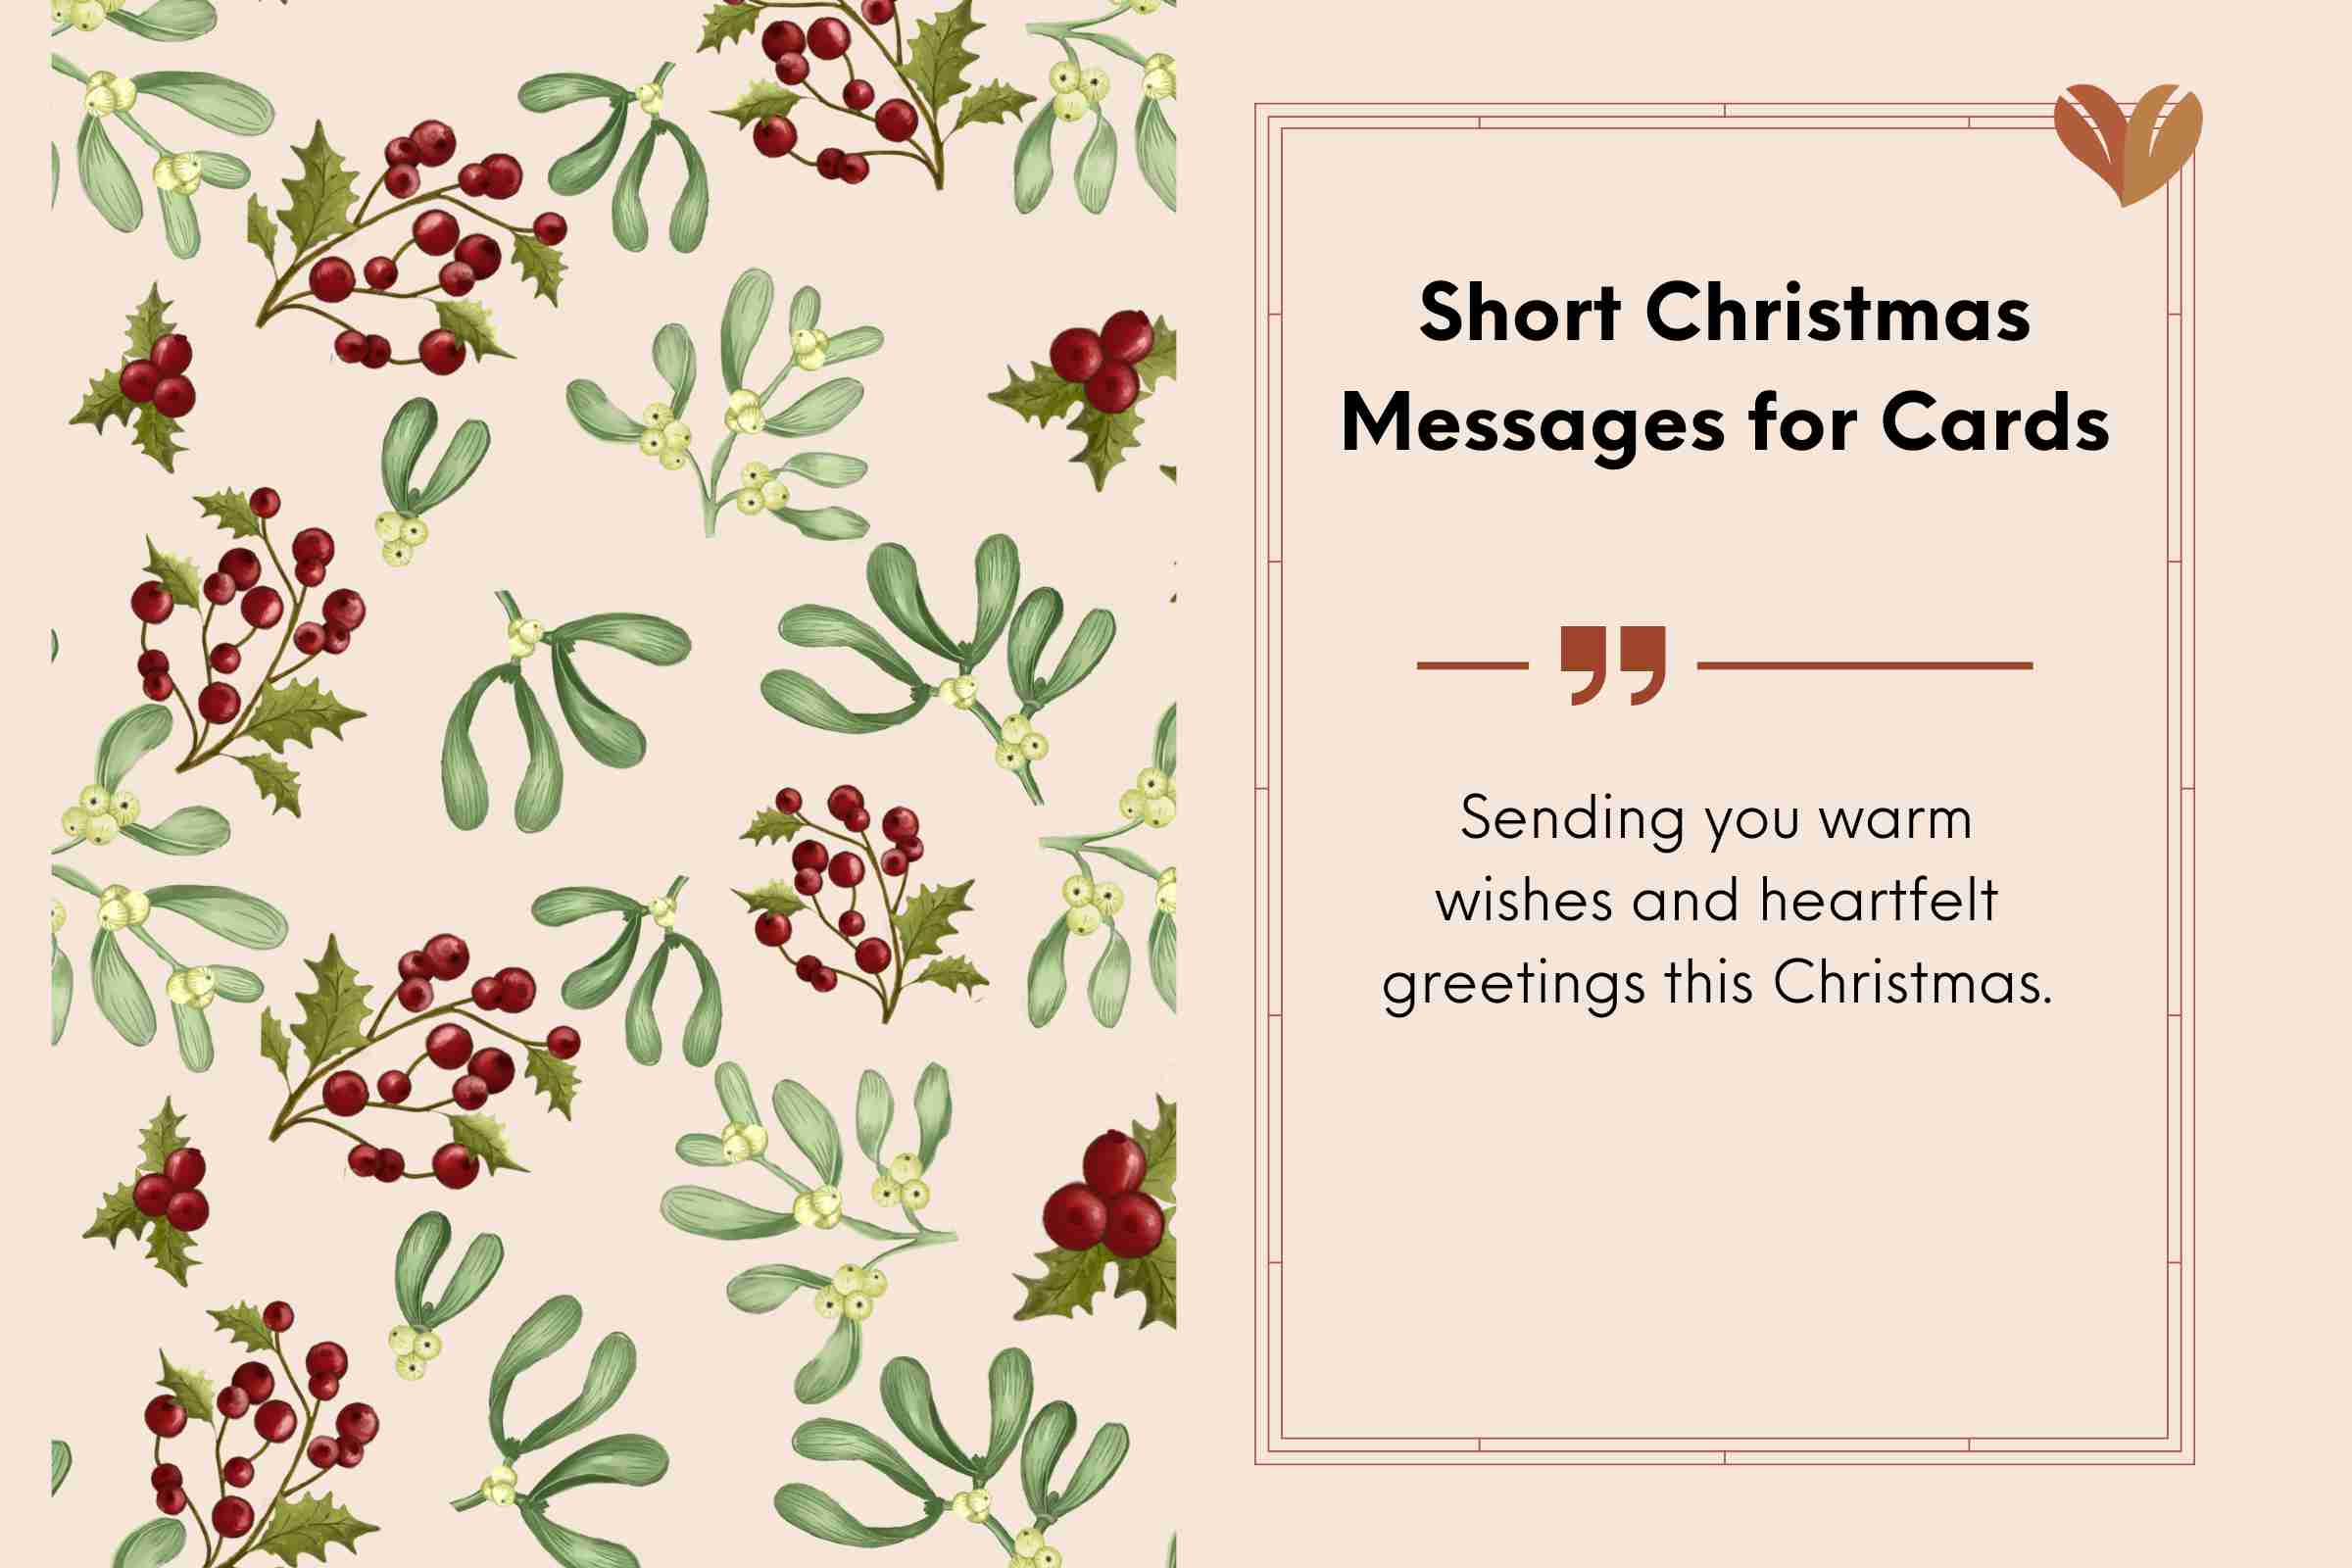 Short Christmas Wishes for Card